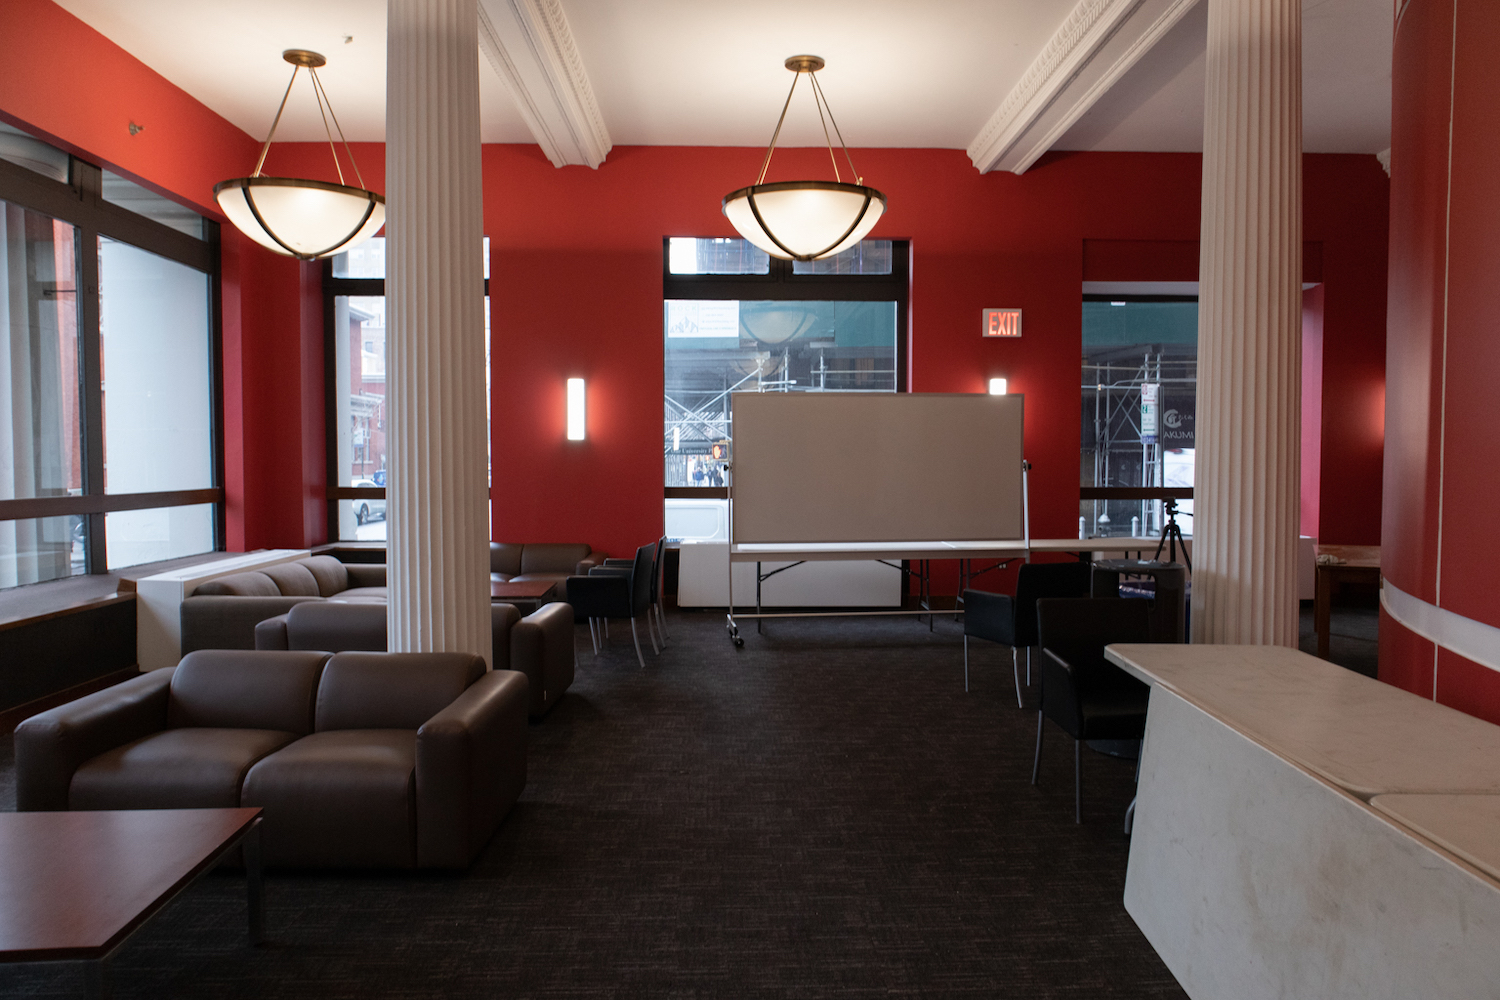 A student lounge on the first floor of the Silver Center. The room has bright, red walls lined with large windows, as well as couches, chairs, tables and a whiteboard inside. Two large lights hang from the ceiling.